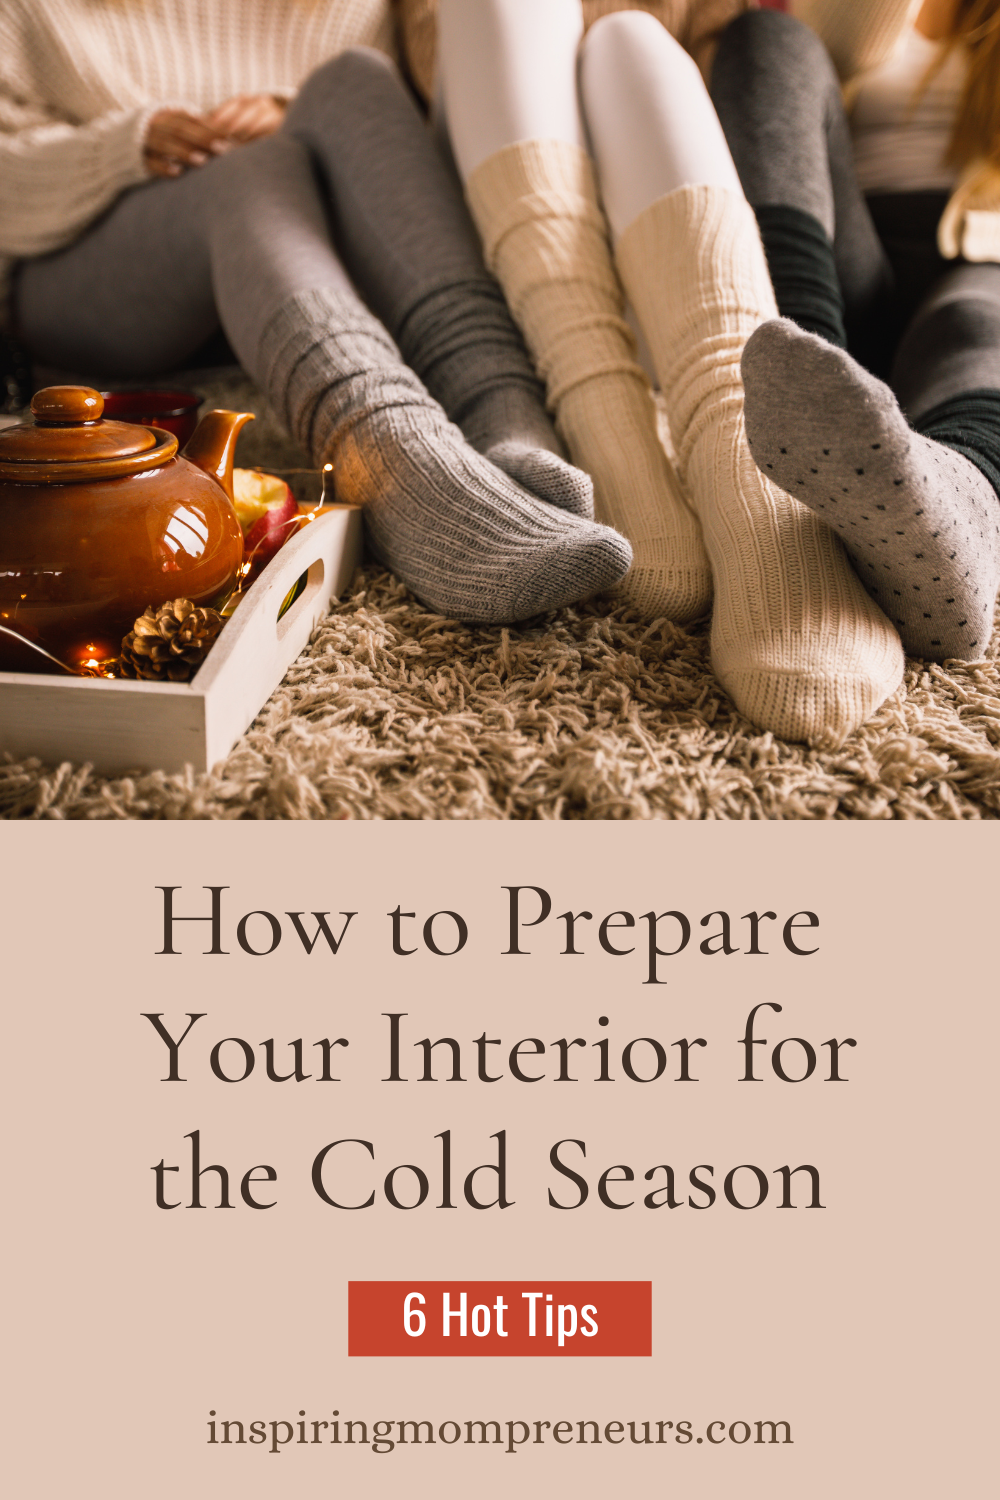 Learning how to prepare your interior for the cold season will ensure you can stay warm and safe. Here are six hot tips to action before winter hits.